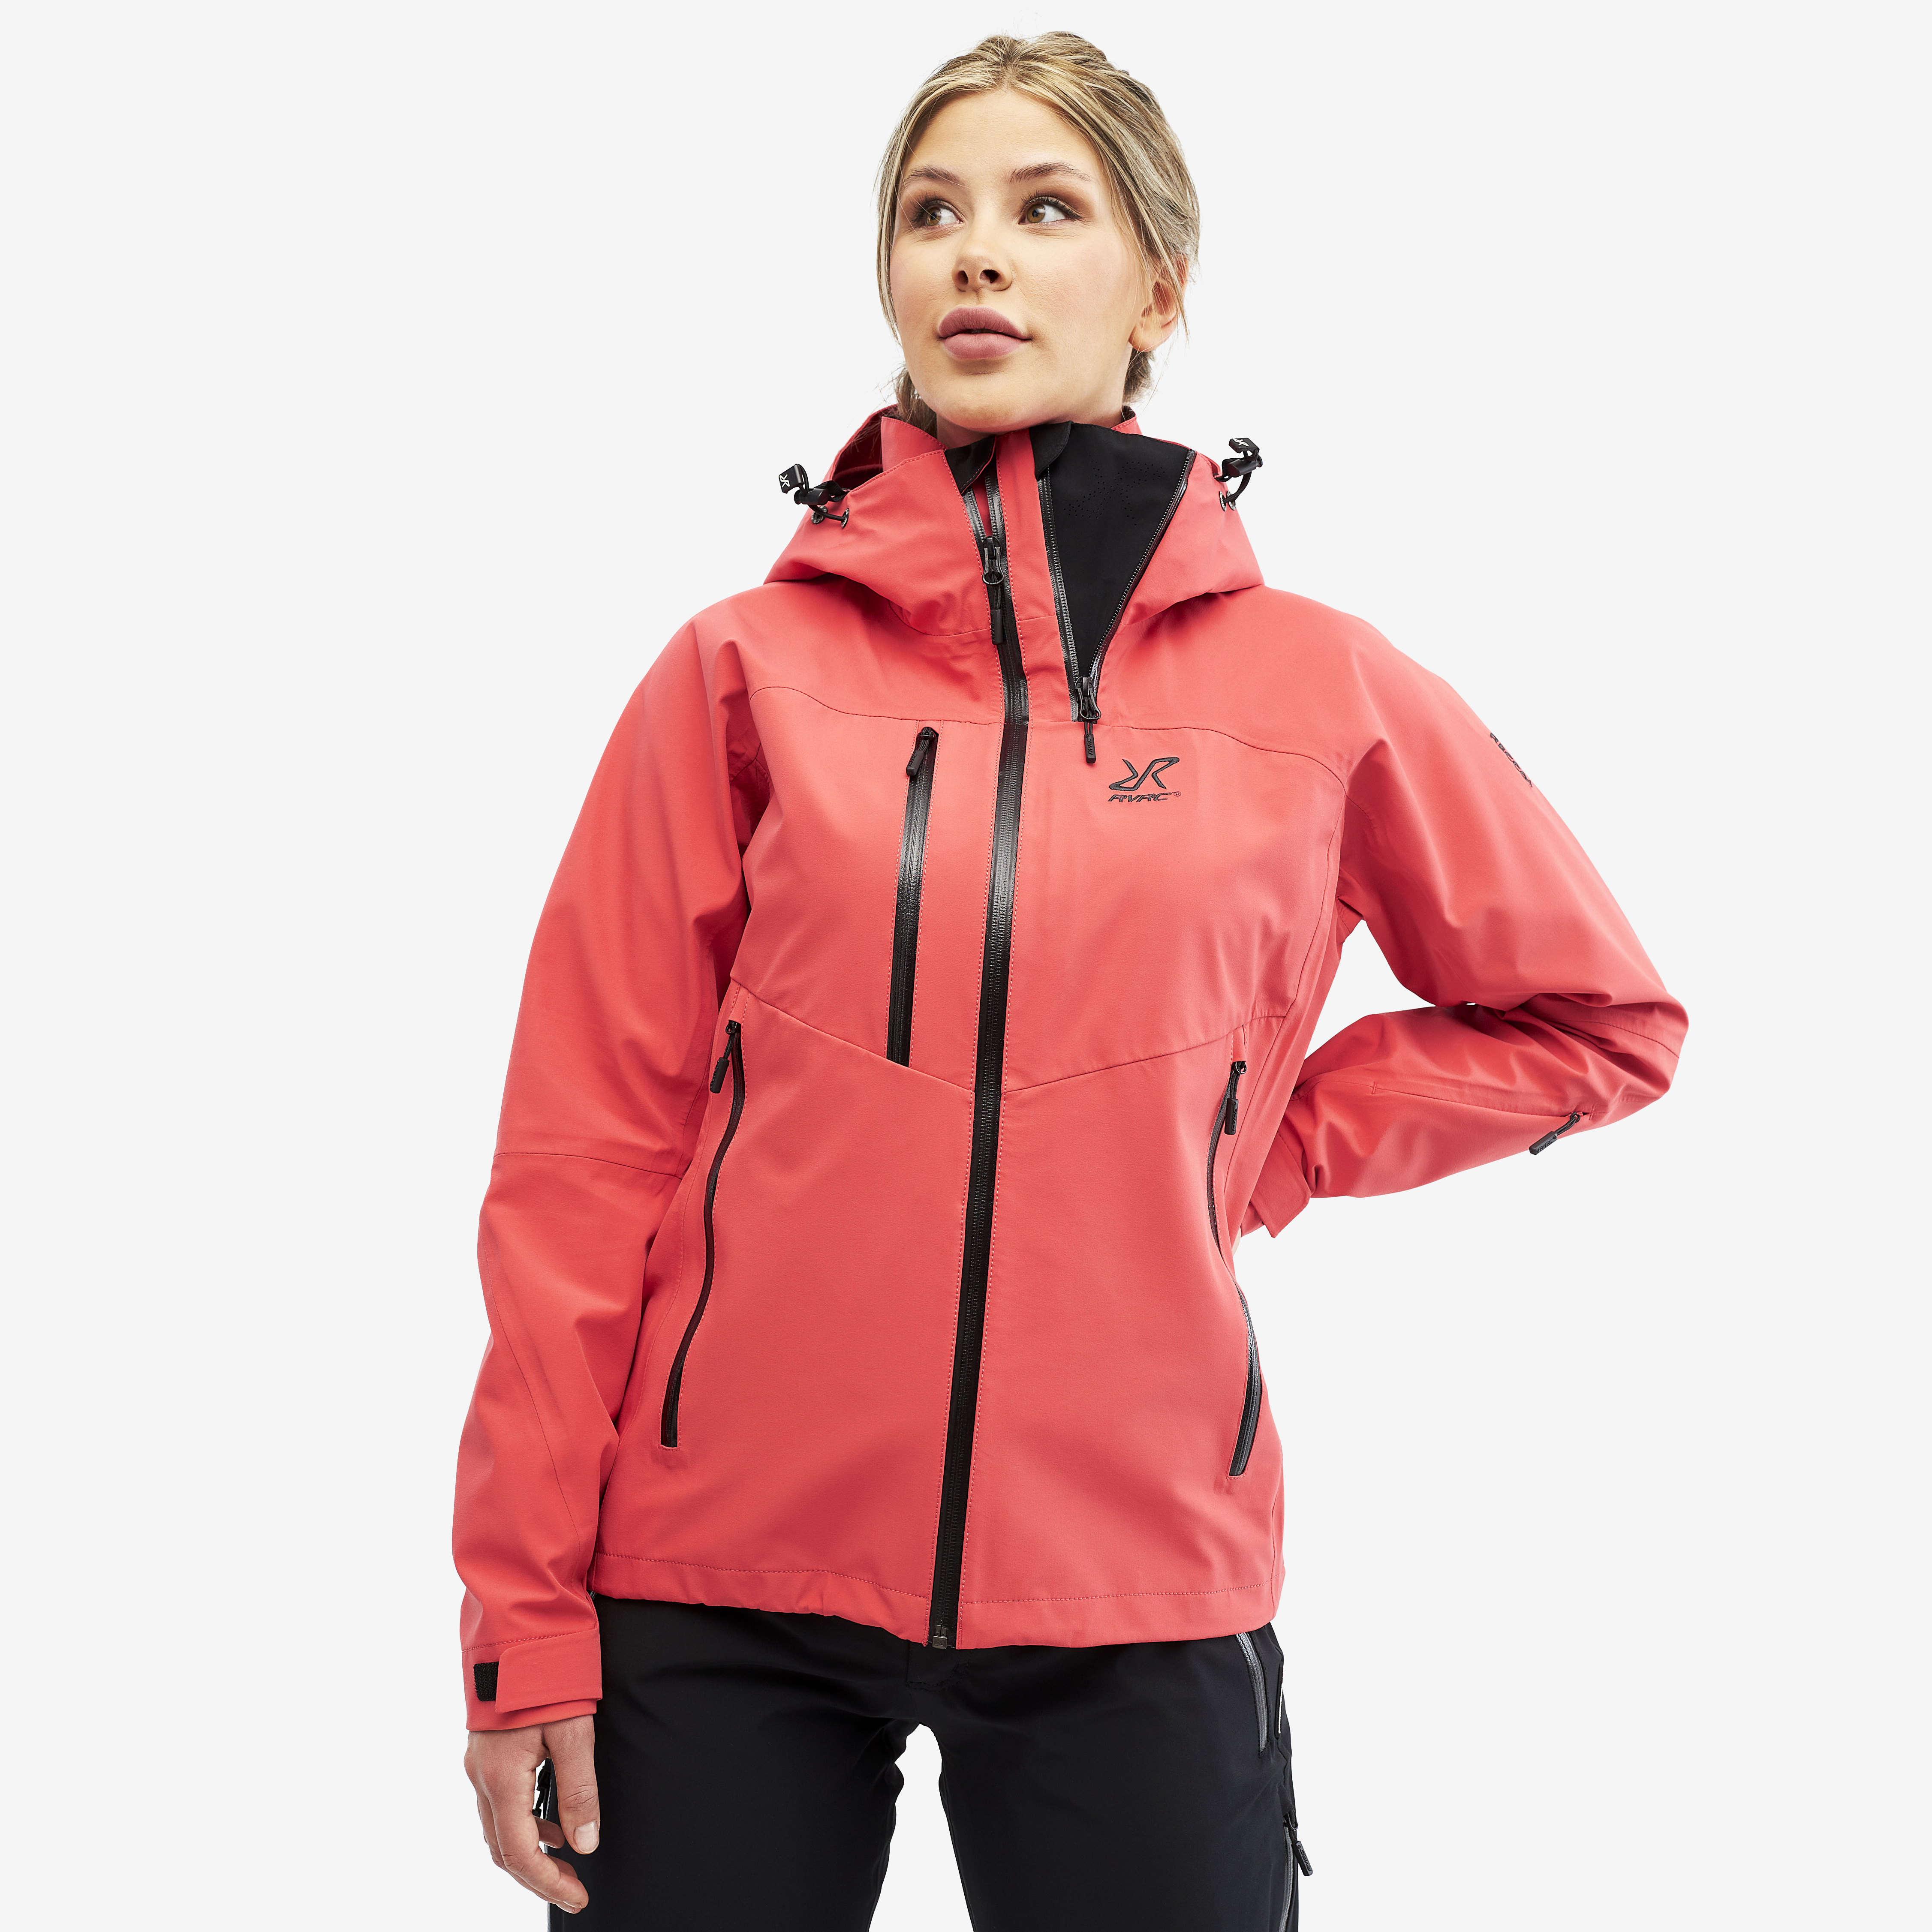 Cyclone Rescue Jacket 2.0 Spiced Coral Women